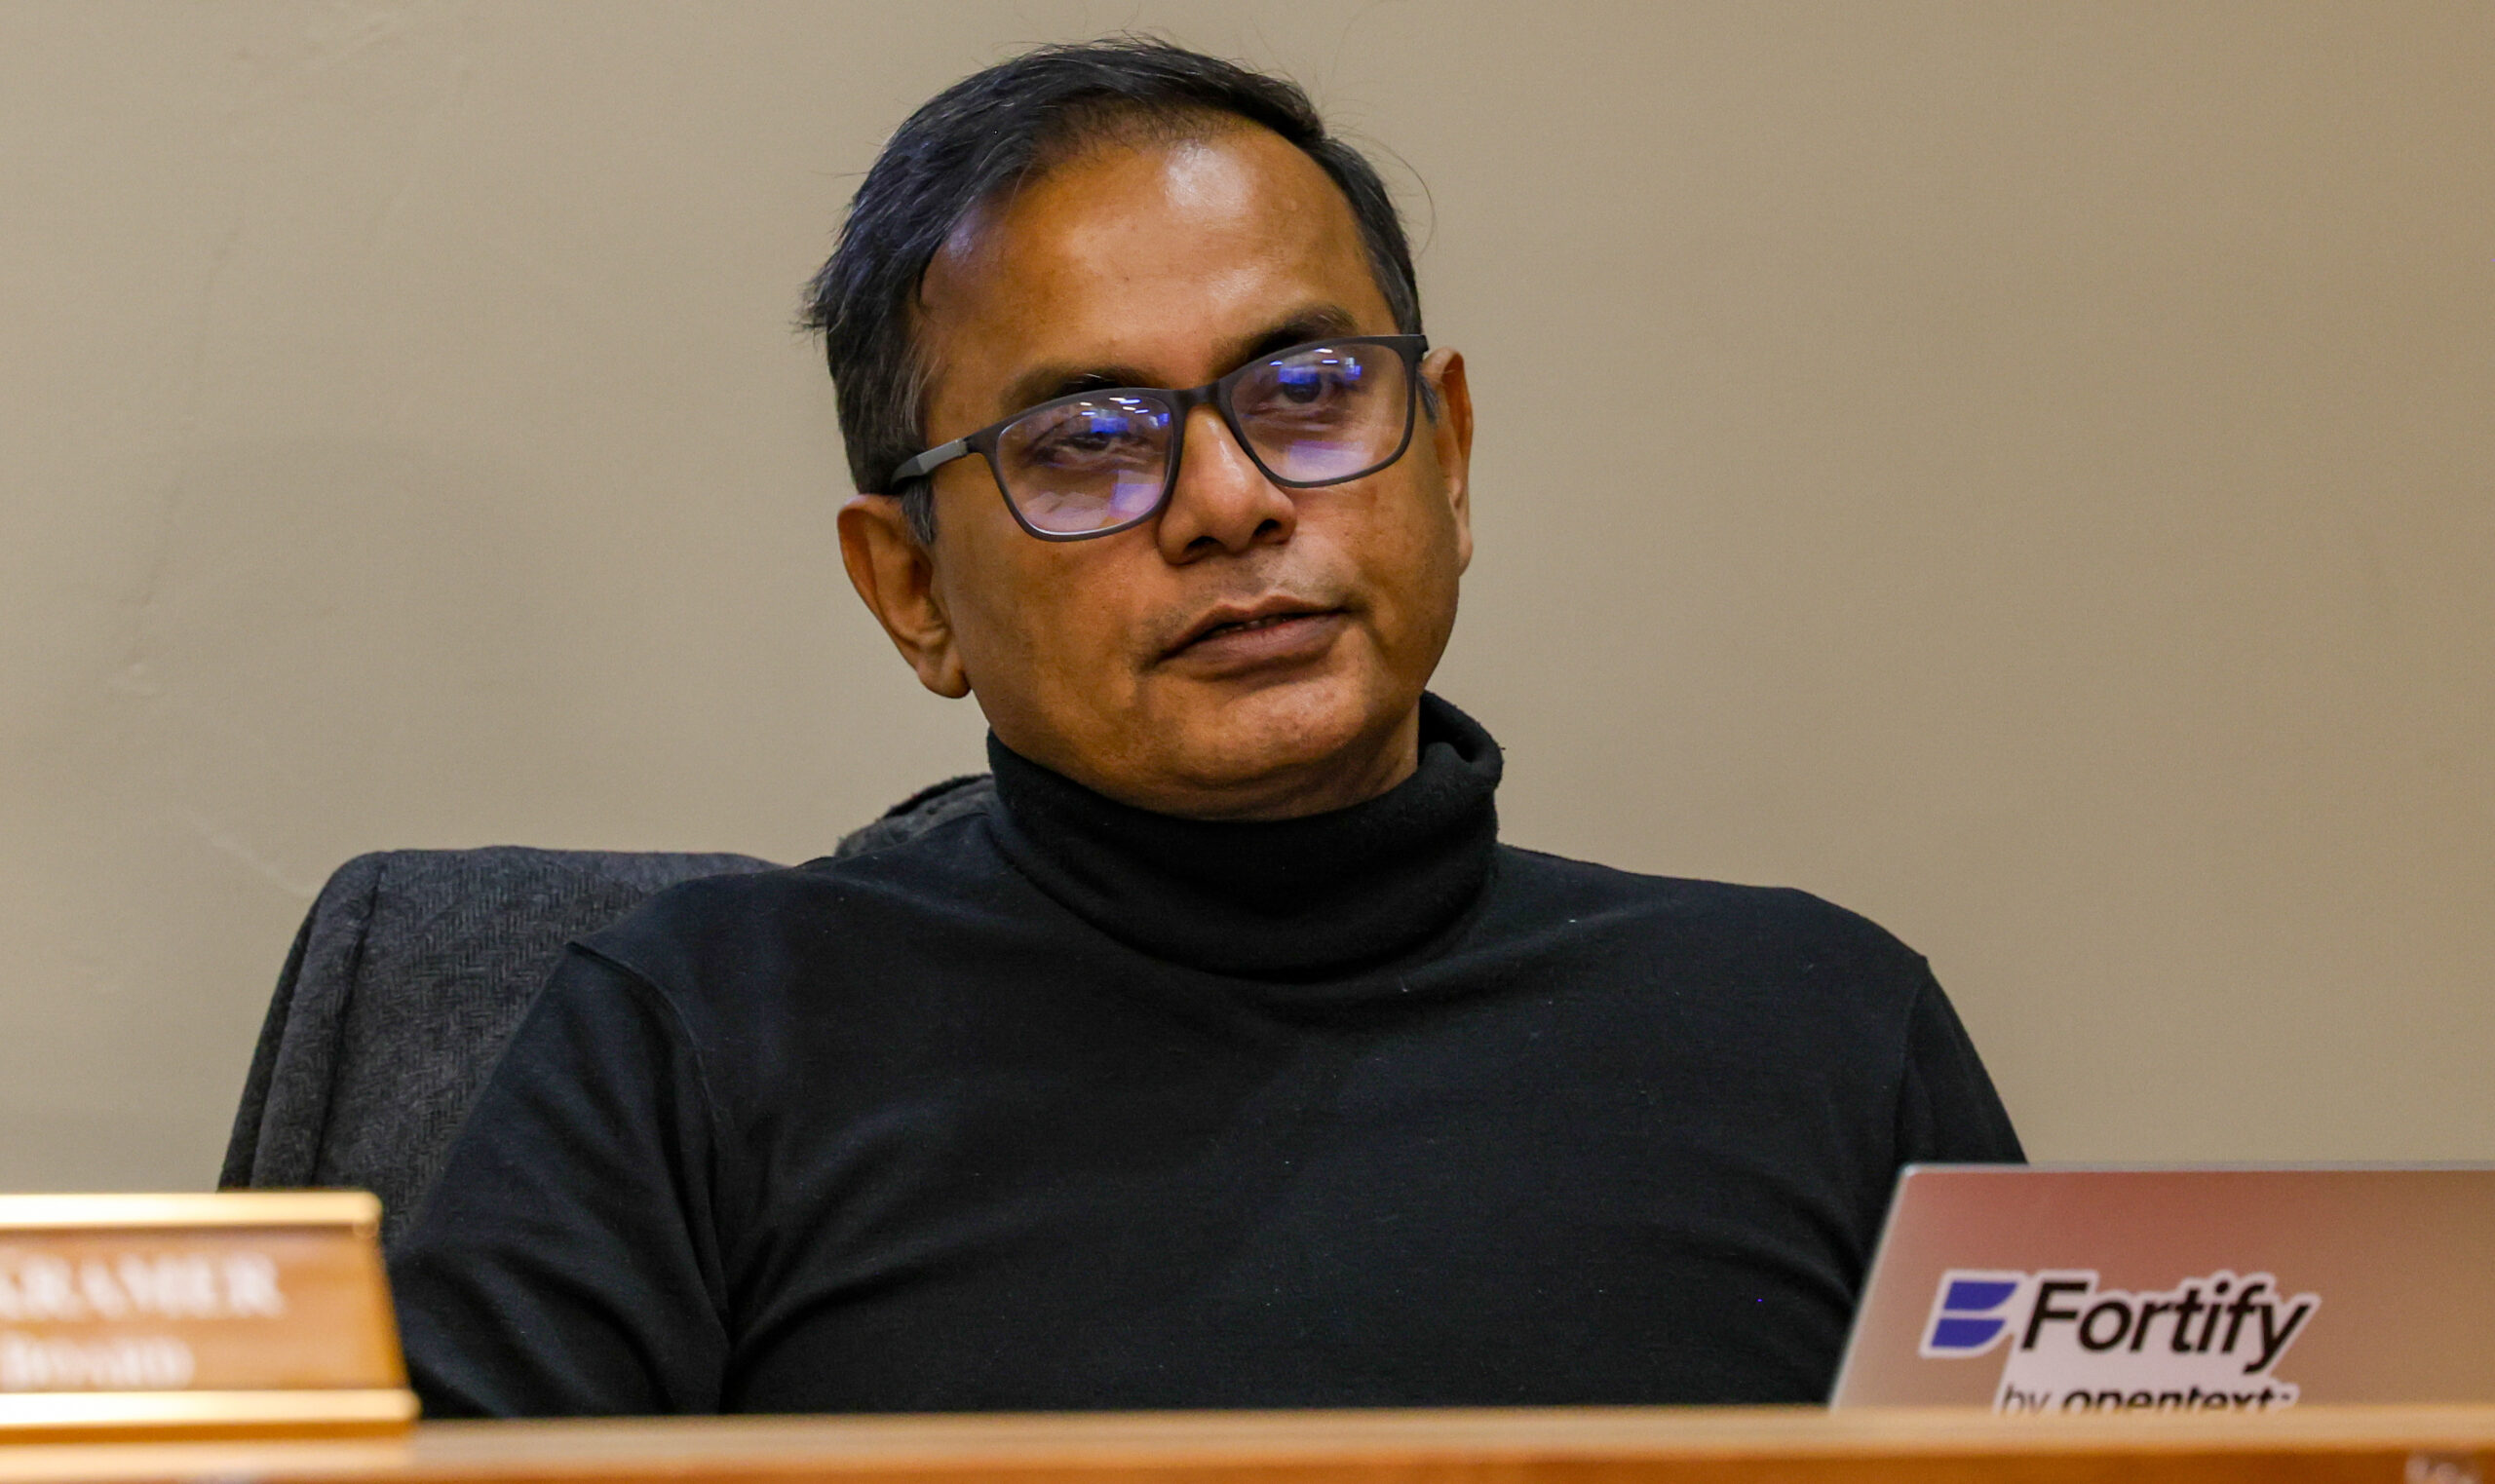 Mannan’s accusations of racism lead to war of words with local website